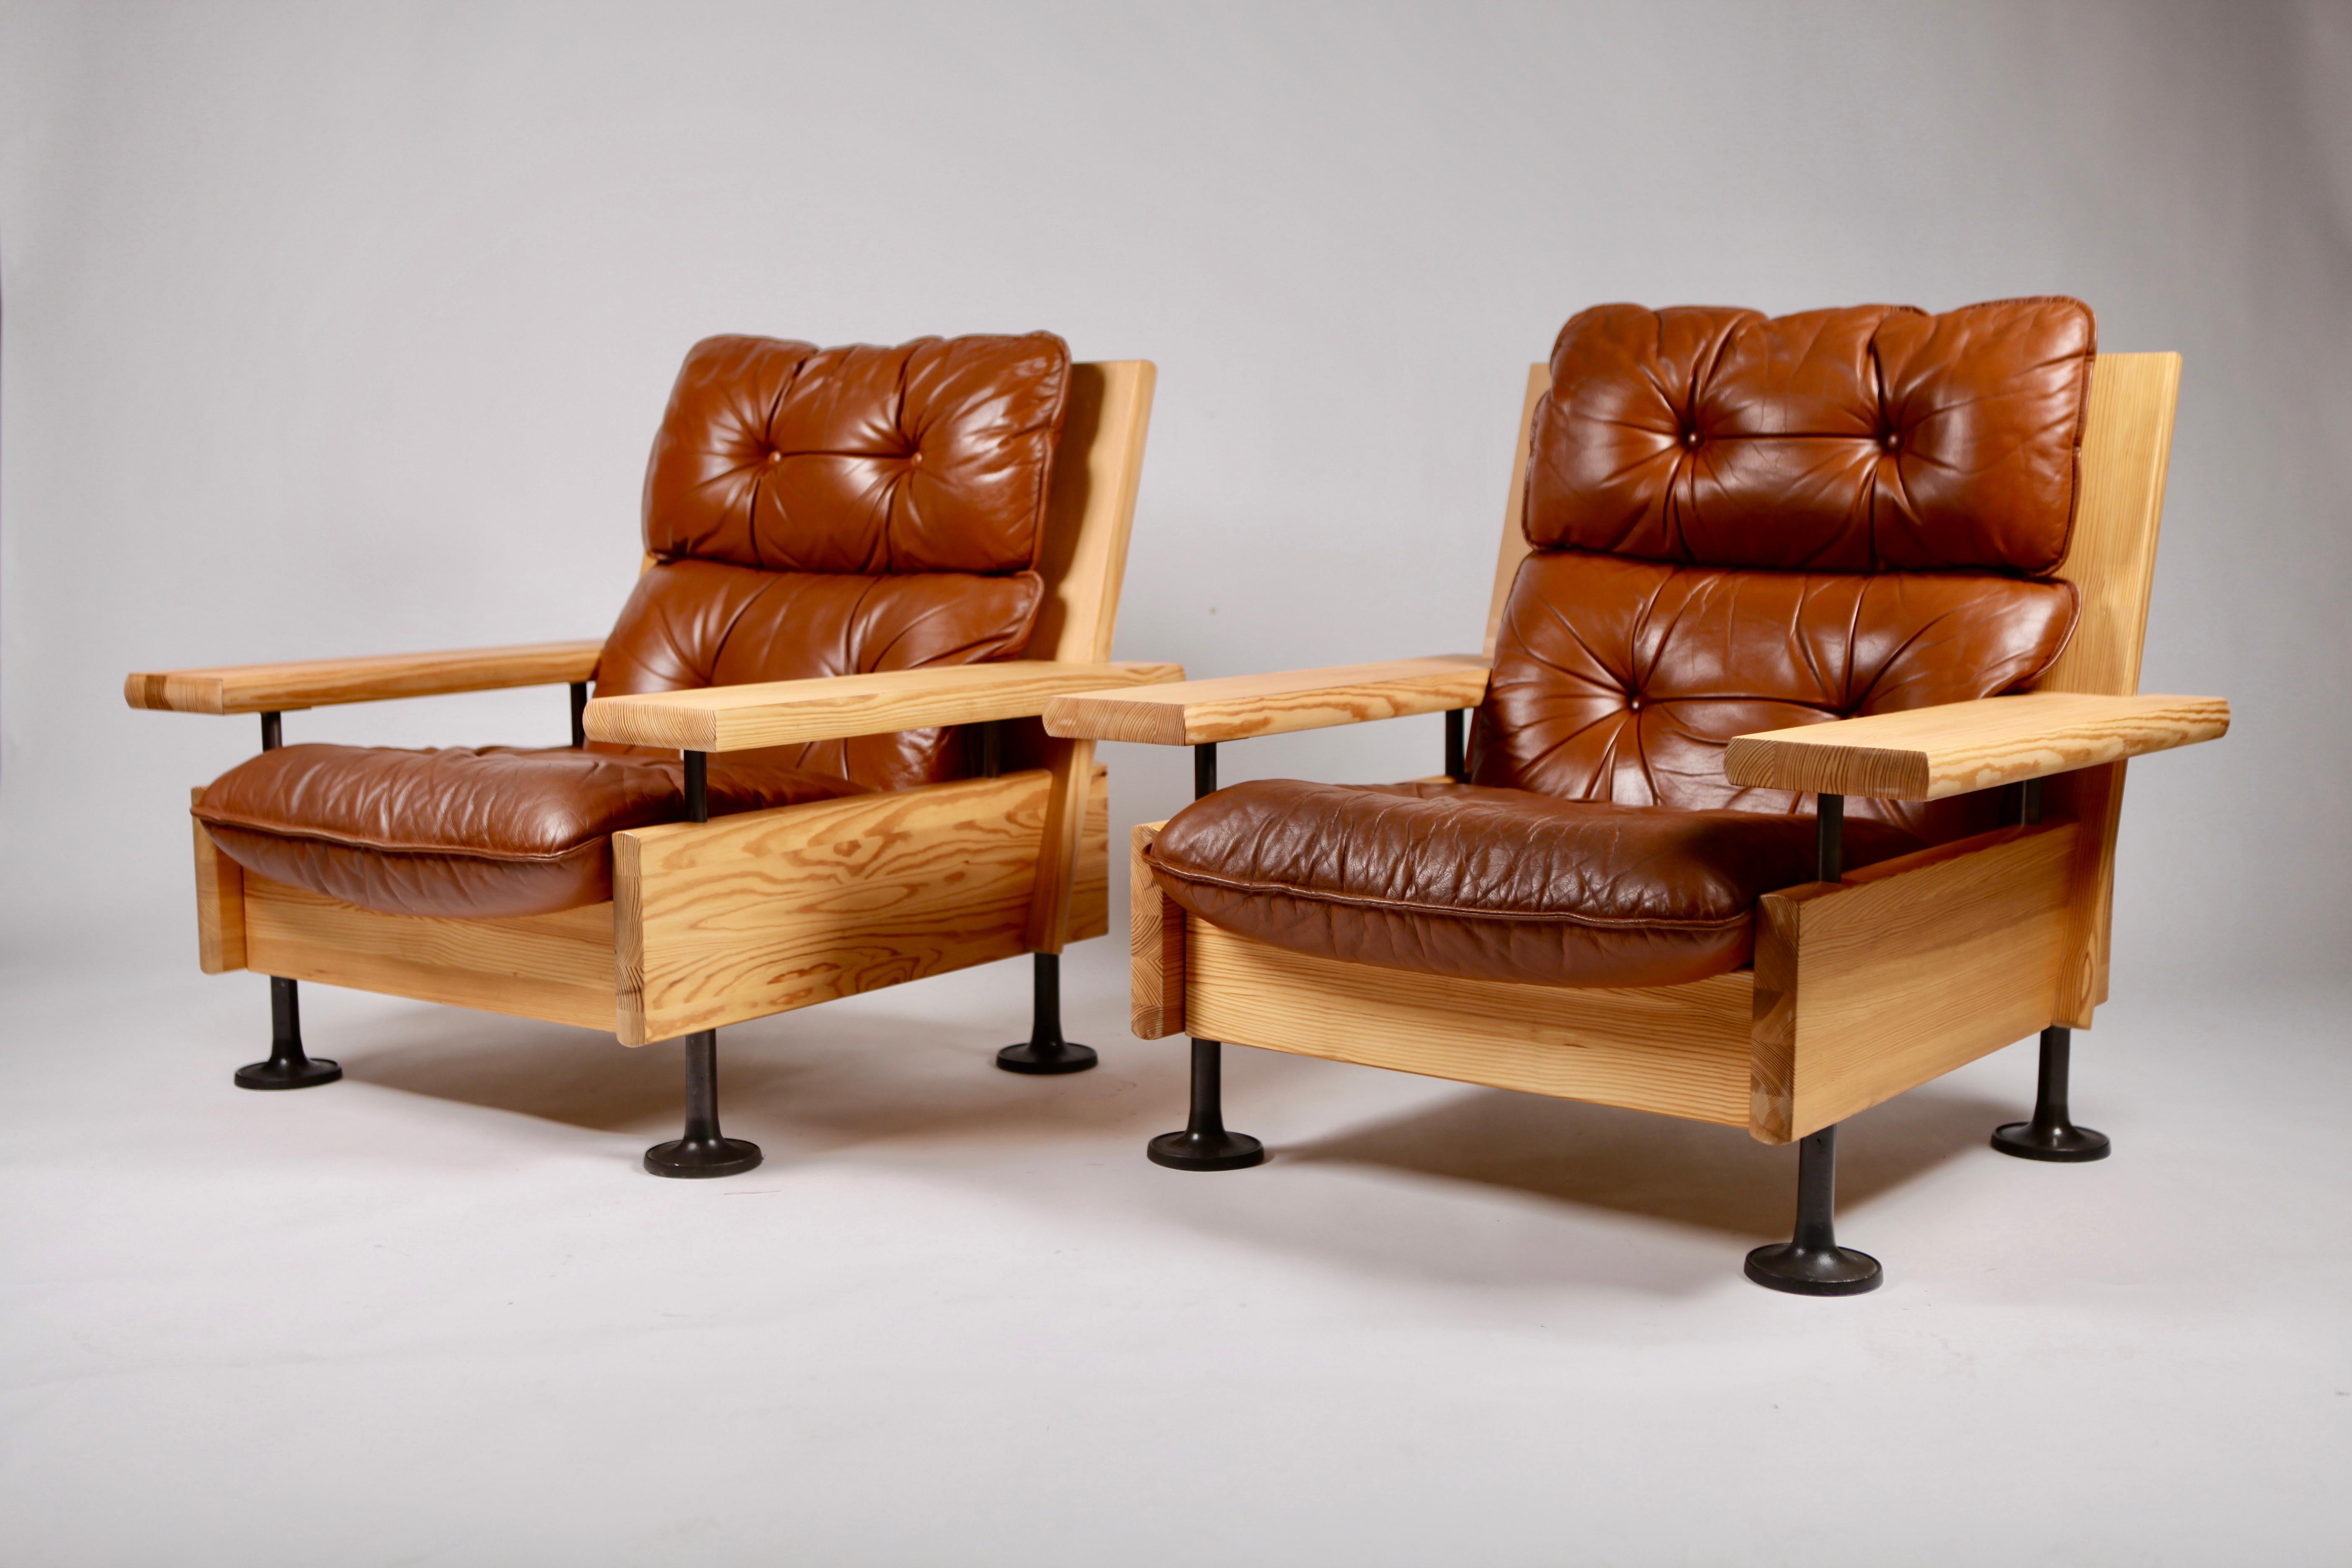 Pair of unique Scandinavian Modern easy chairs by Hannu Jyräs, executed for Uveka in Finland, early 1970s.
Solid Oregon pine and brown leather, black cast iron trumpet legs and natural linen to the back.
Ultra-comfortable and excellent vintage